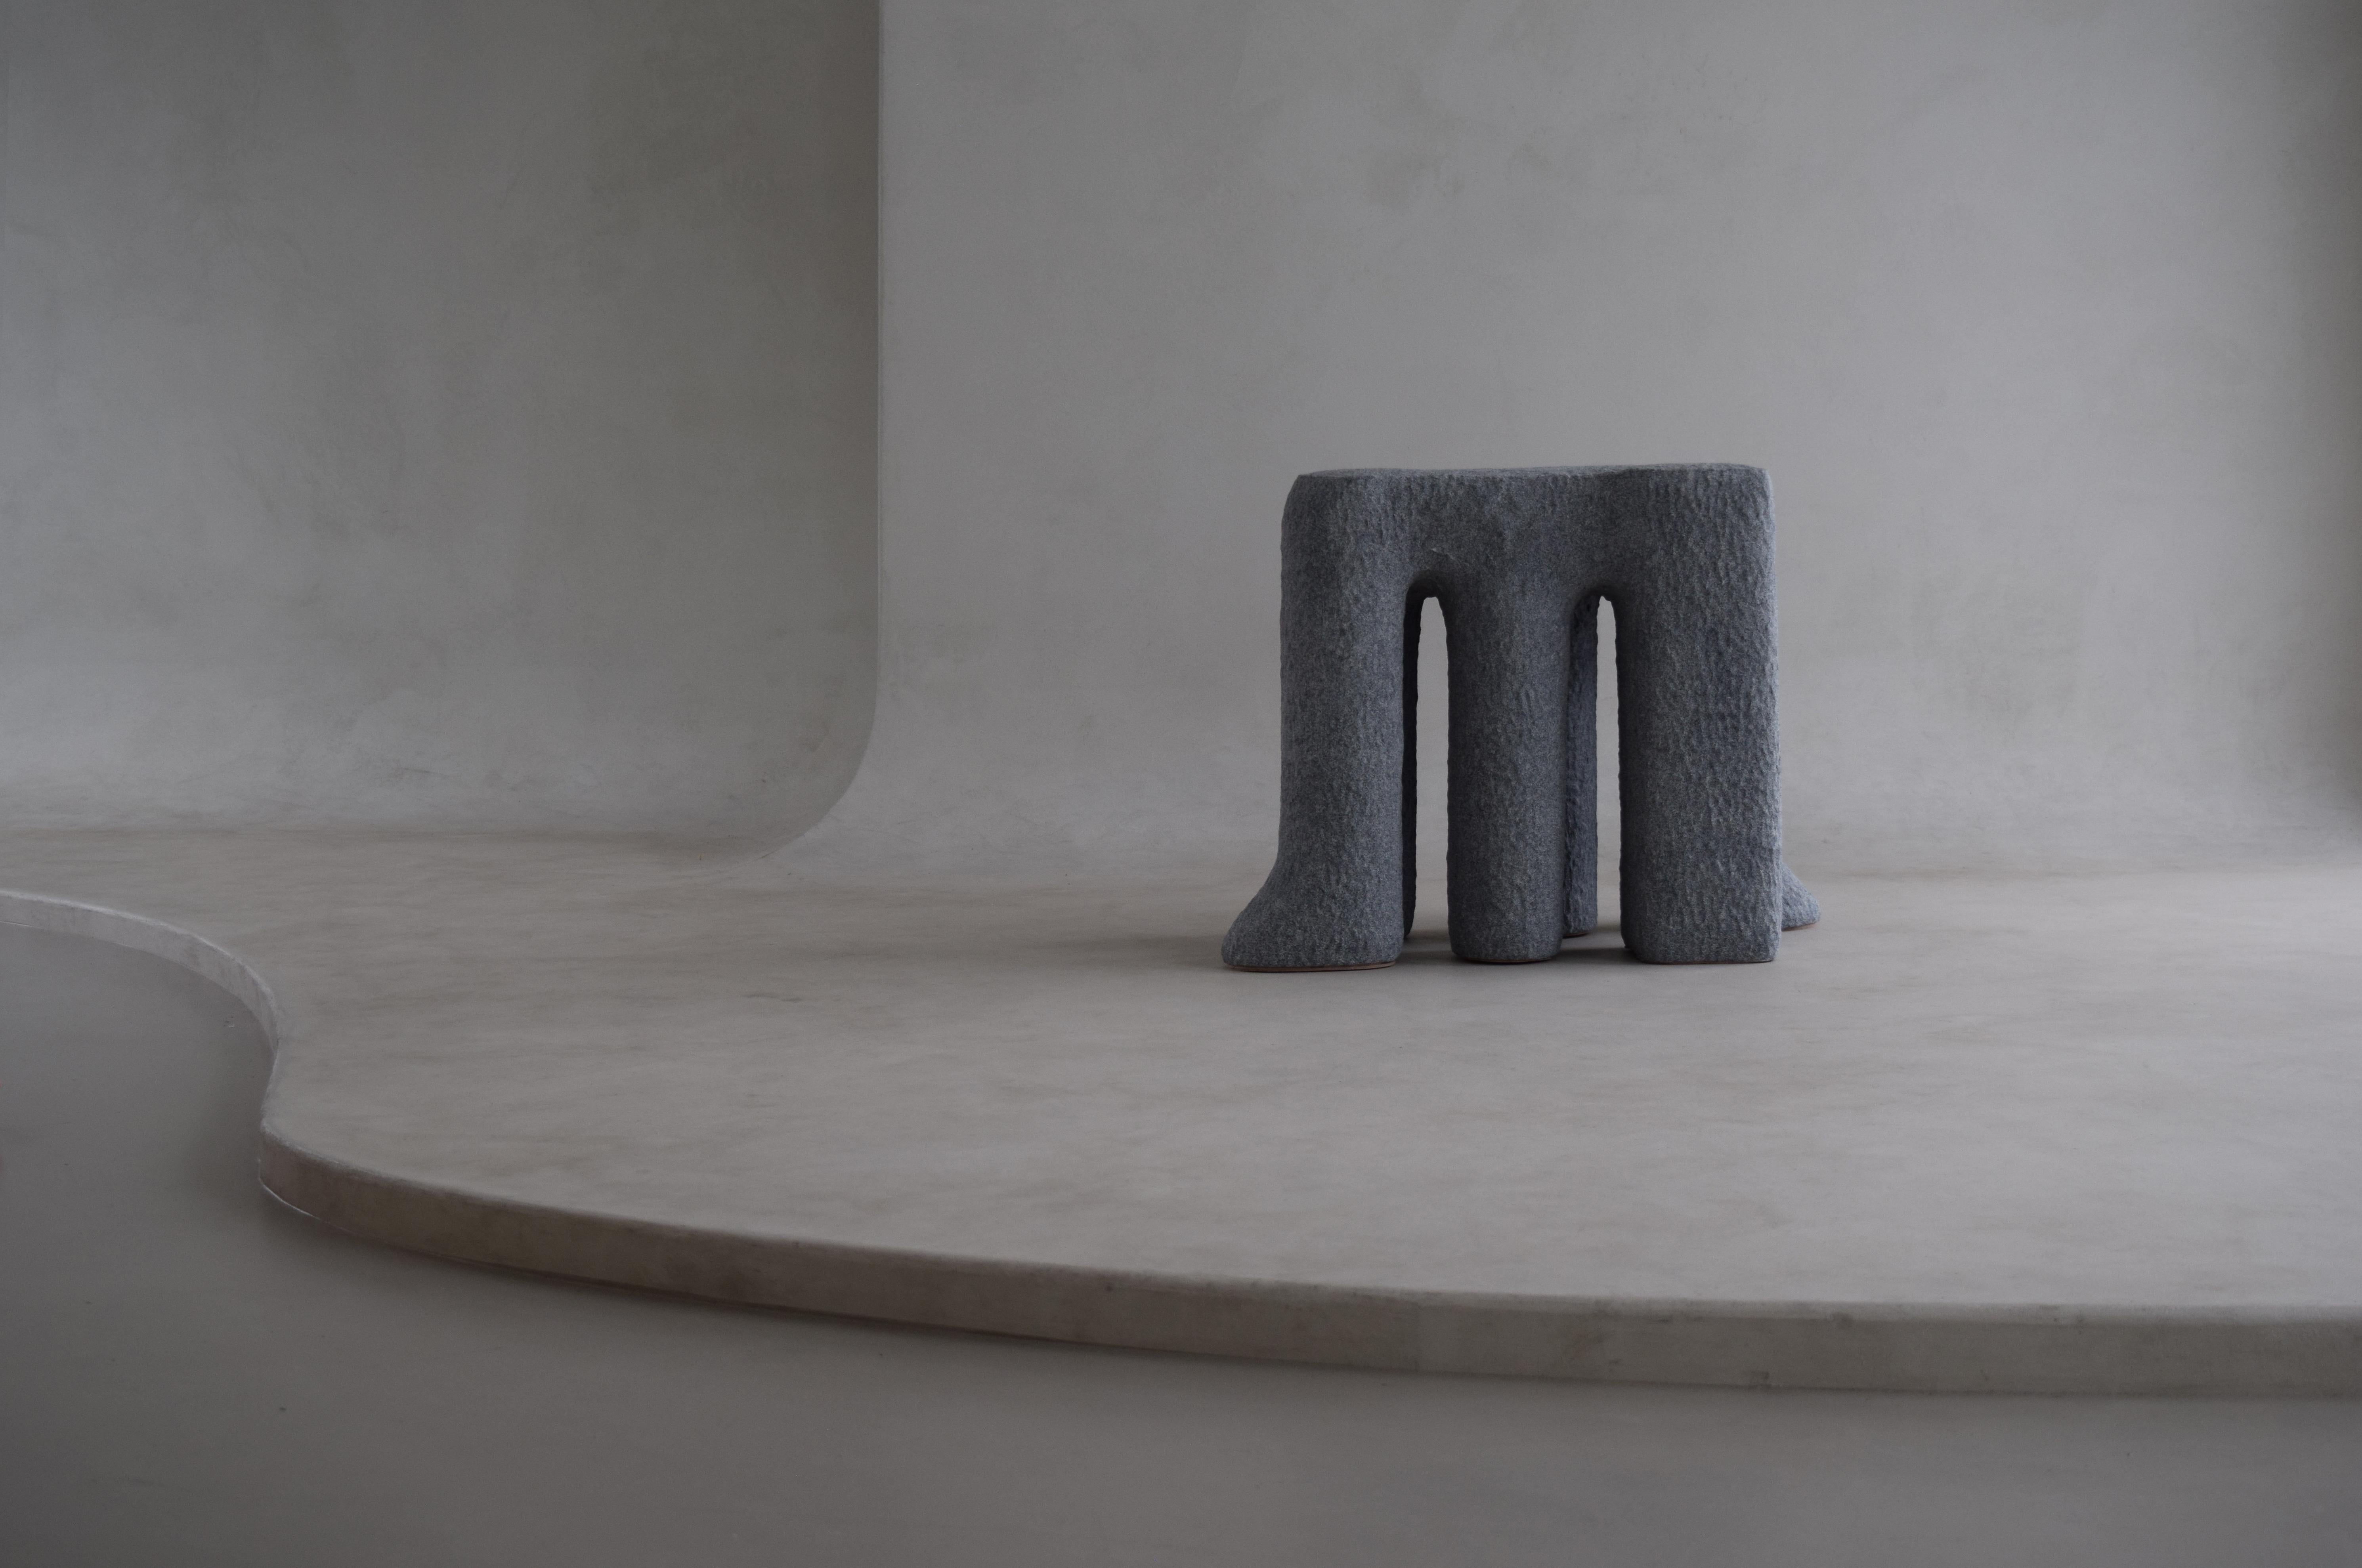 The Pillar series is a series of hand-built stools/ side tables in ceramic 

Dimension:
75 x 40 x 54 cm H

Using stoneware and sand finishing material/ hand building techniques of ceramic.

Additional info:
The wooden box is included in the